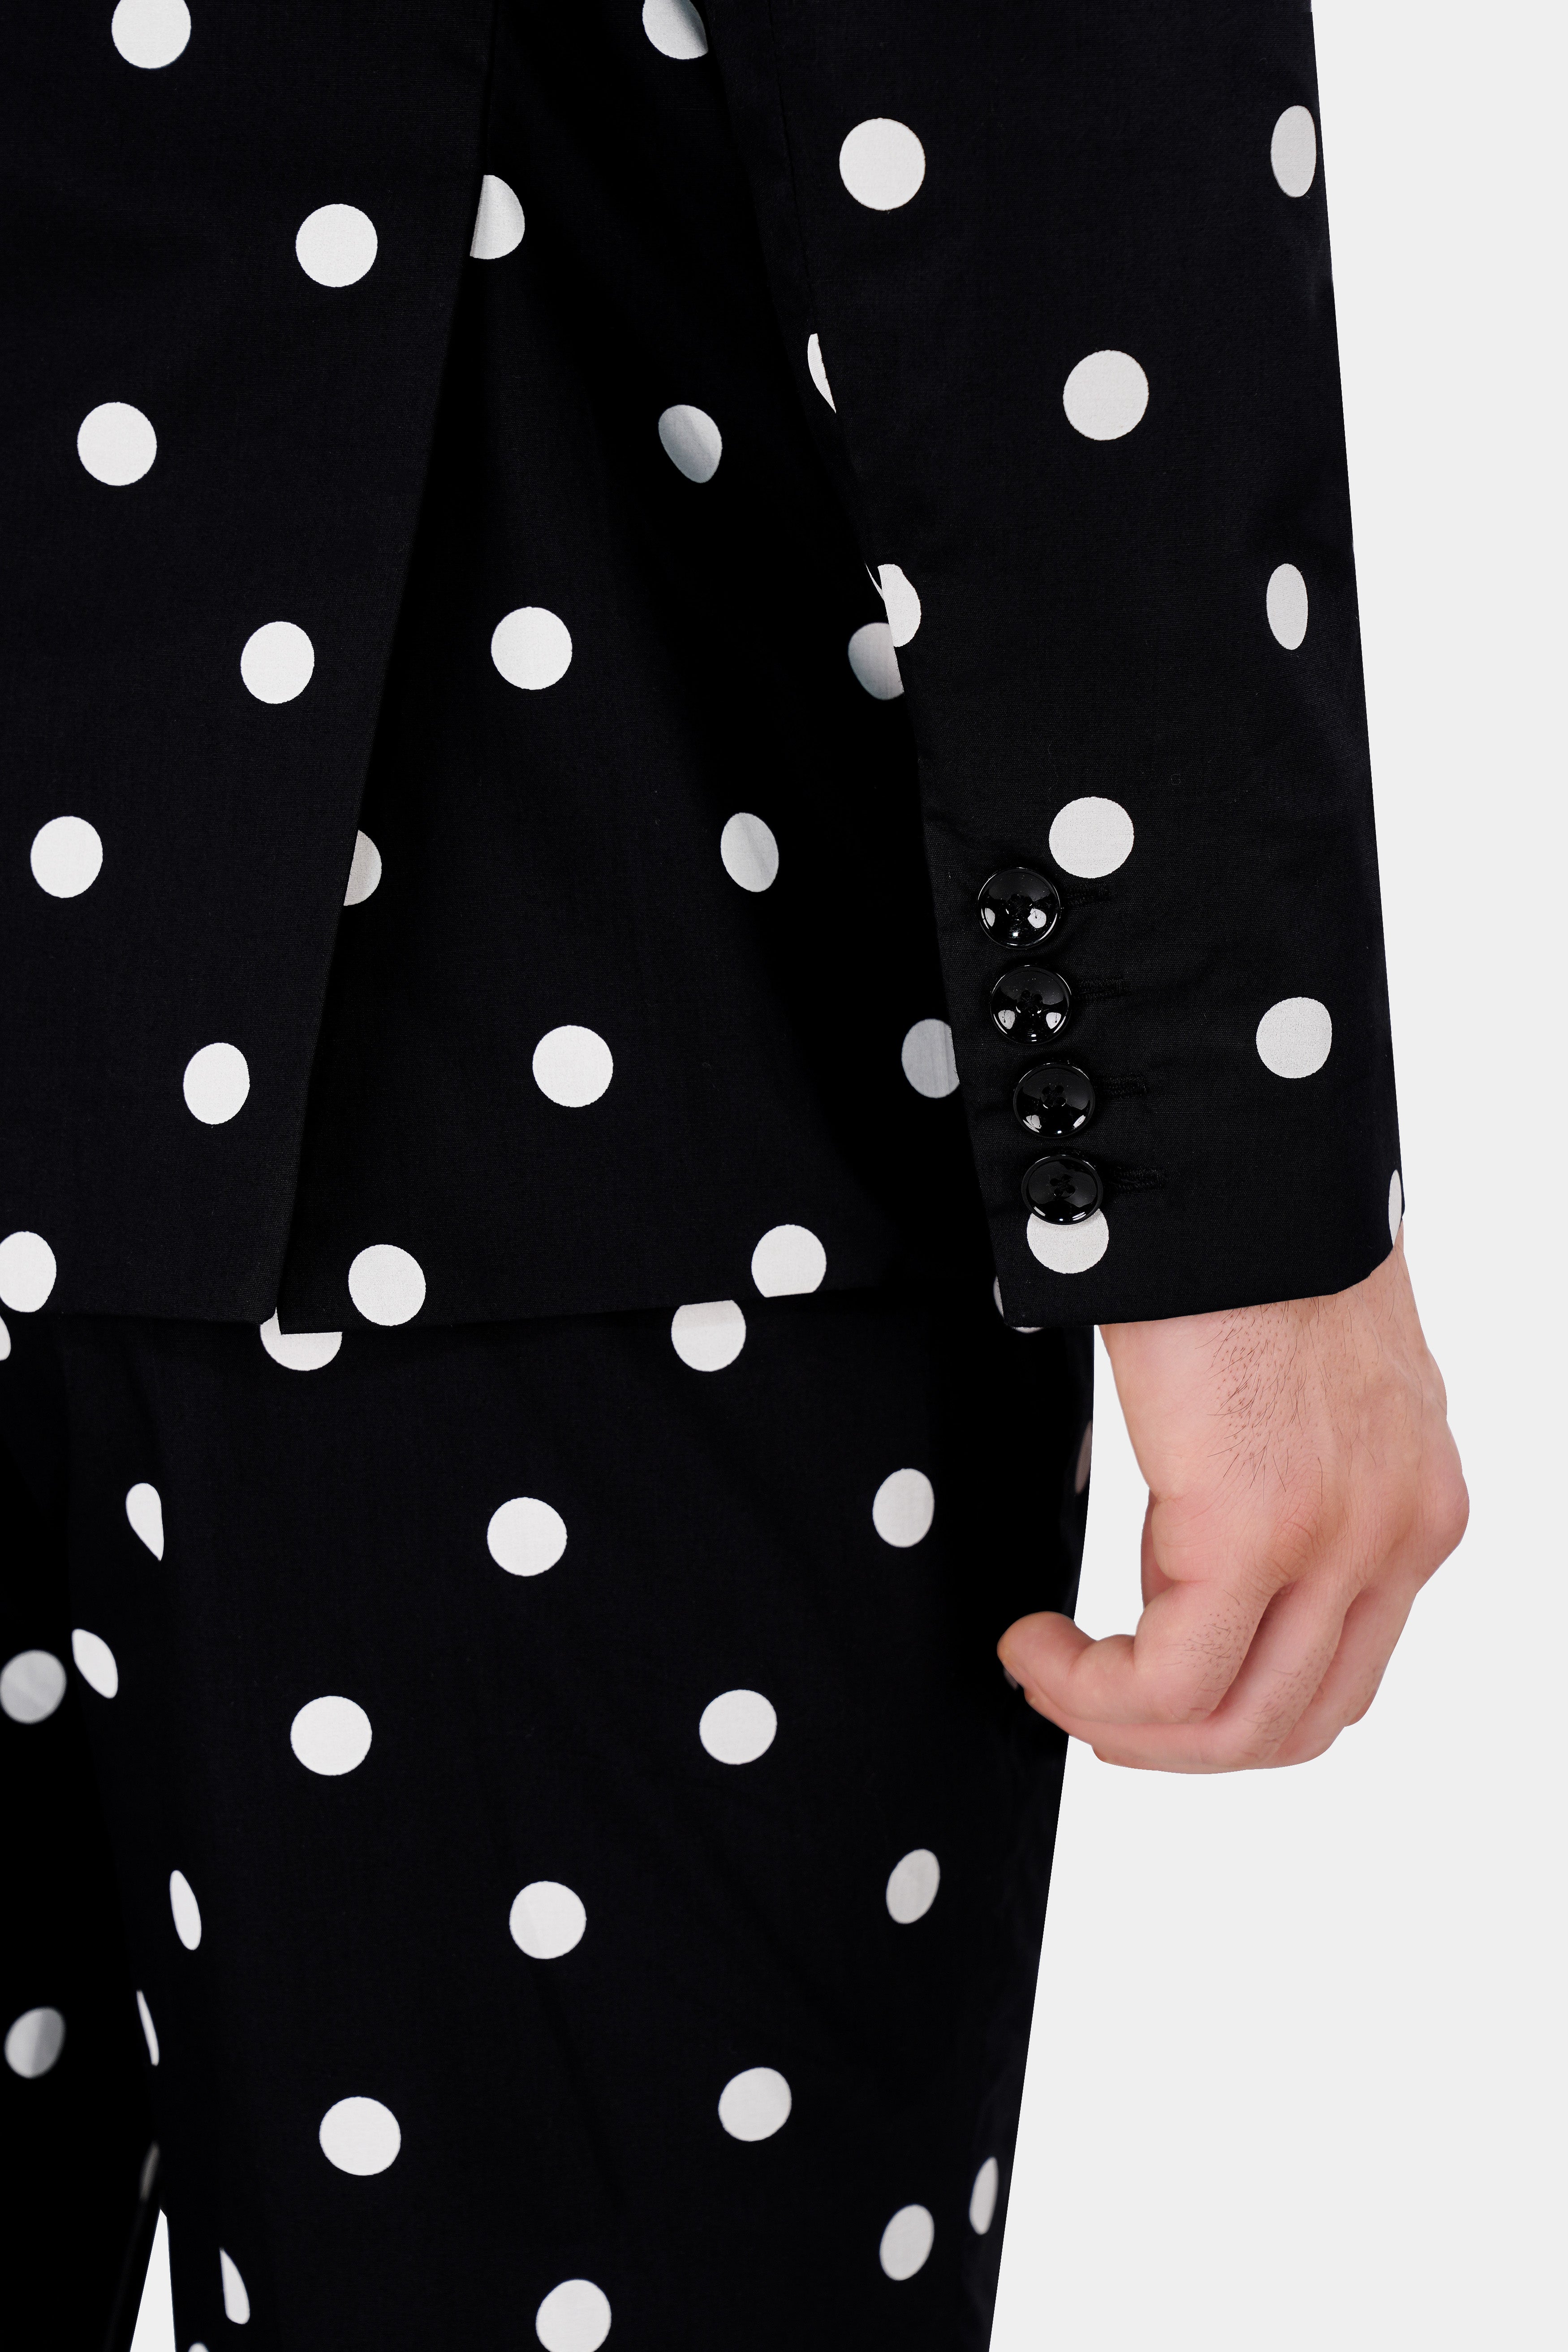 Jade Black with White Polka Dotted Premium Cotton Designer Blazer BL2845-SBP-D442-36, BL2845-SBP-D442-38, BL2845-SBP-D442-40, BL2845-SBP-D442-42, BL2845-SBP-D442-44, BL2845-SBP-D442-46, BL2845-SBP-D442-48, BL2845-SBP-D442-50, BL2845-SBP-D442-52, BL2845-SBP-D442-54, BL2845-SBP-D442-56, BL2845-SBP-D442-58, BL2845-SBP-D442-60